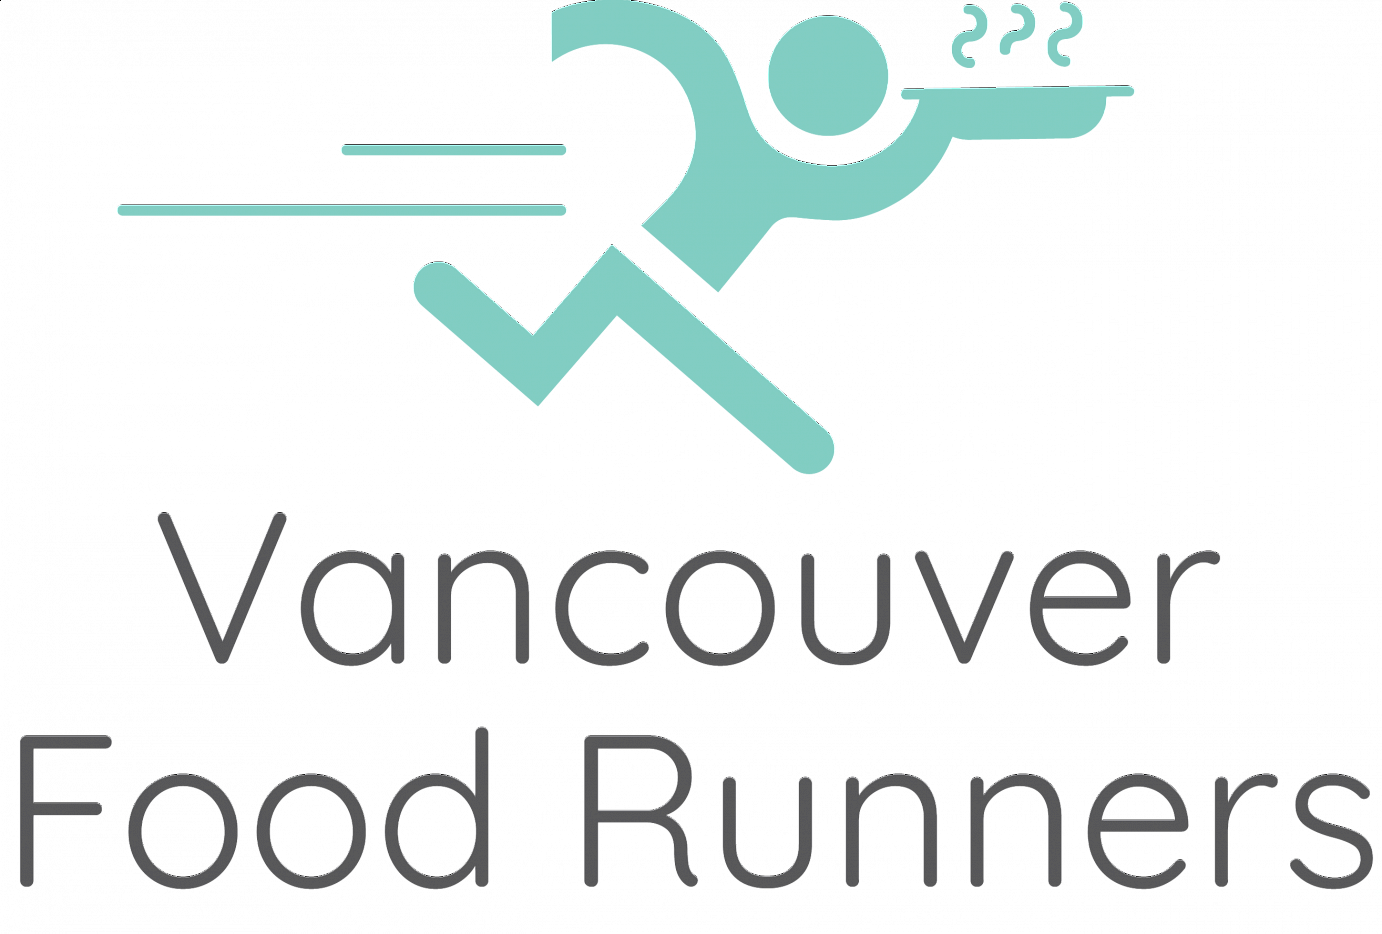 Vancouver Food Runners, our partner